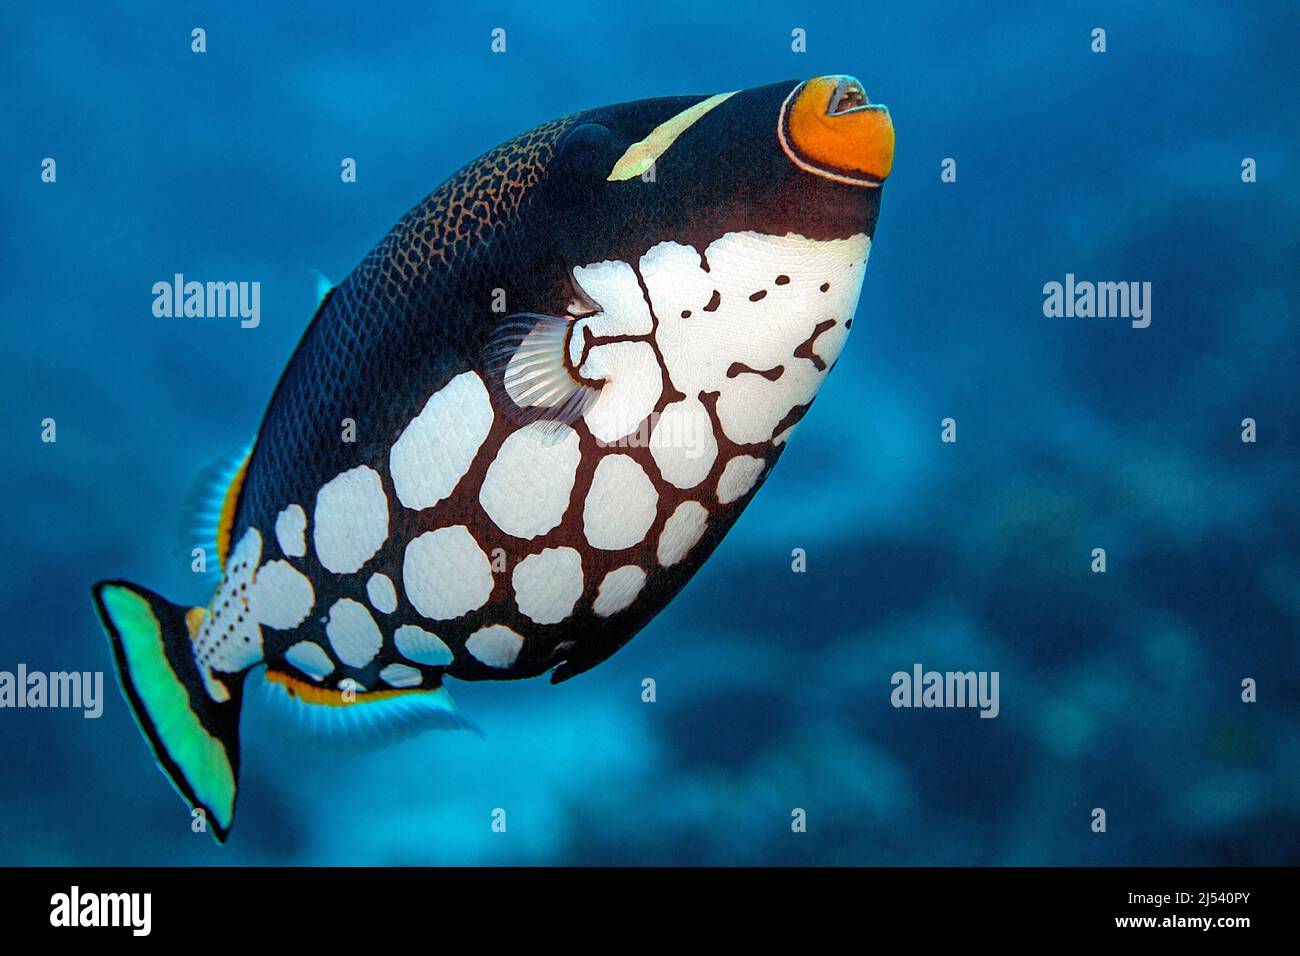 Clown Triggerfish or Big-spotted Triggerfish (Balistoides conspicillum) swimming in a coral reef, Ari Atoll, Maldives, Indian Ocean, Asia Stock Photo